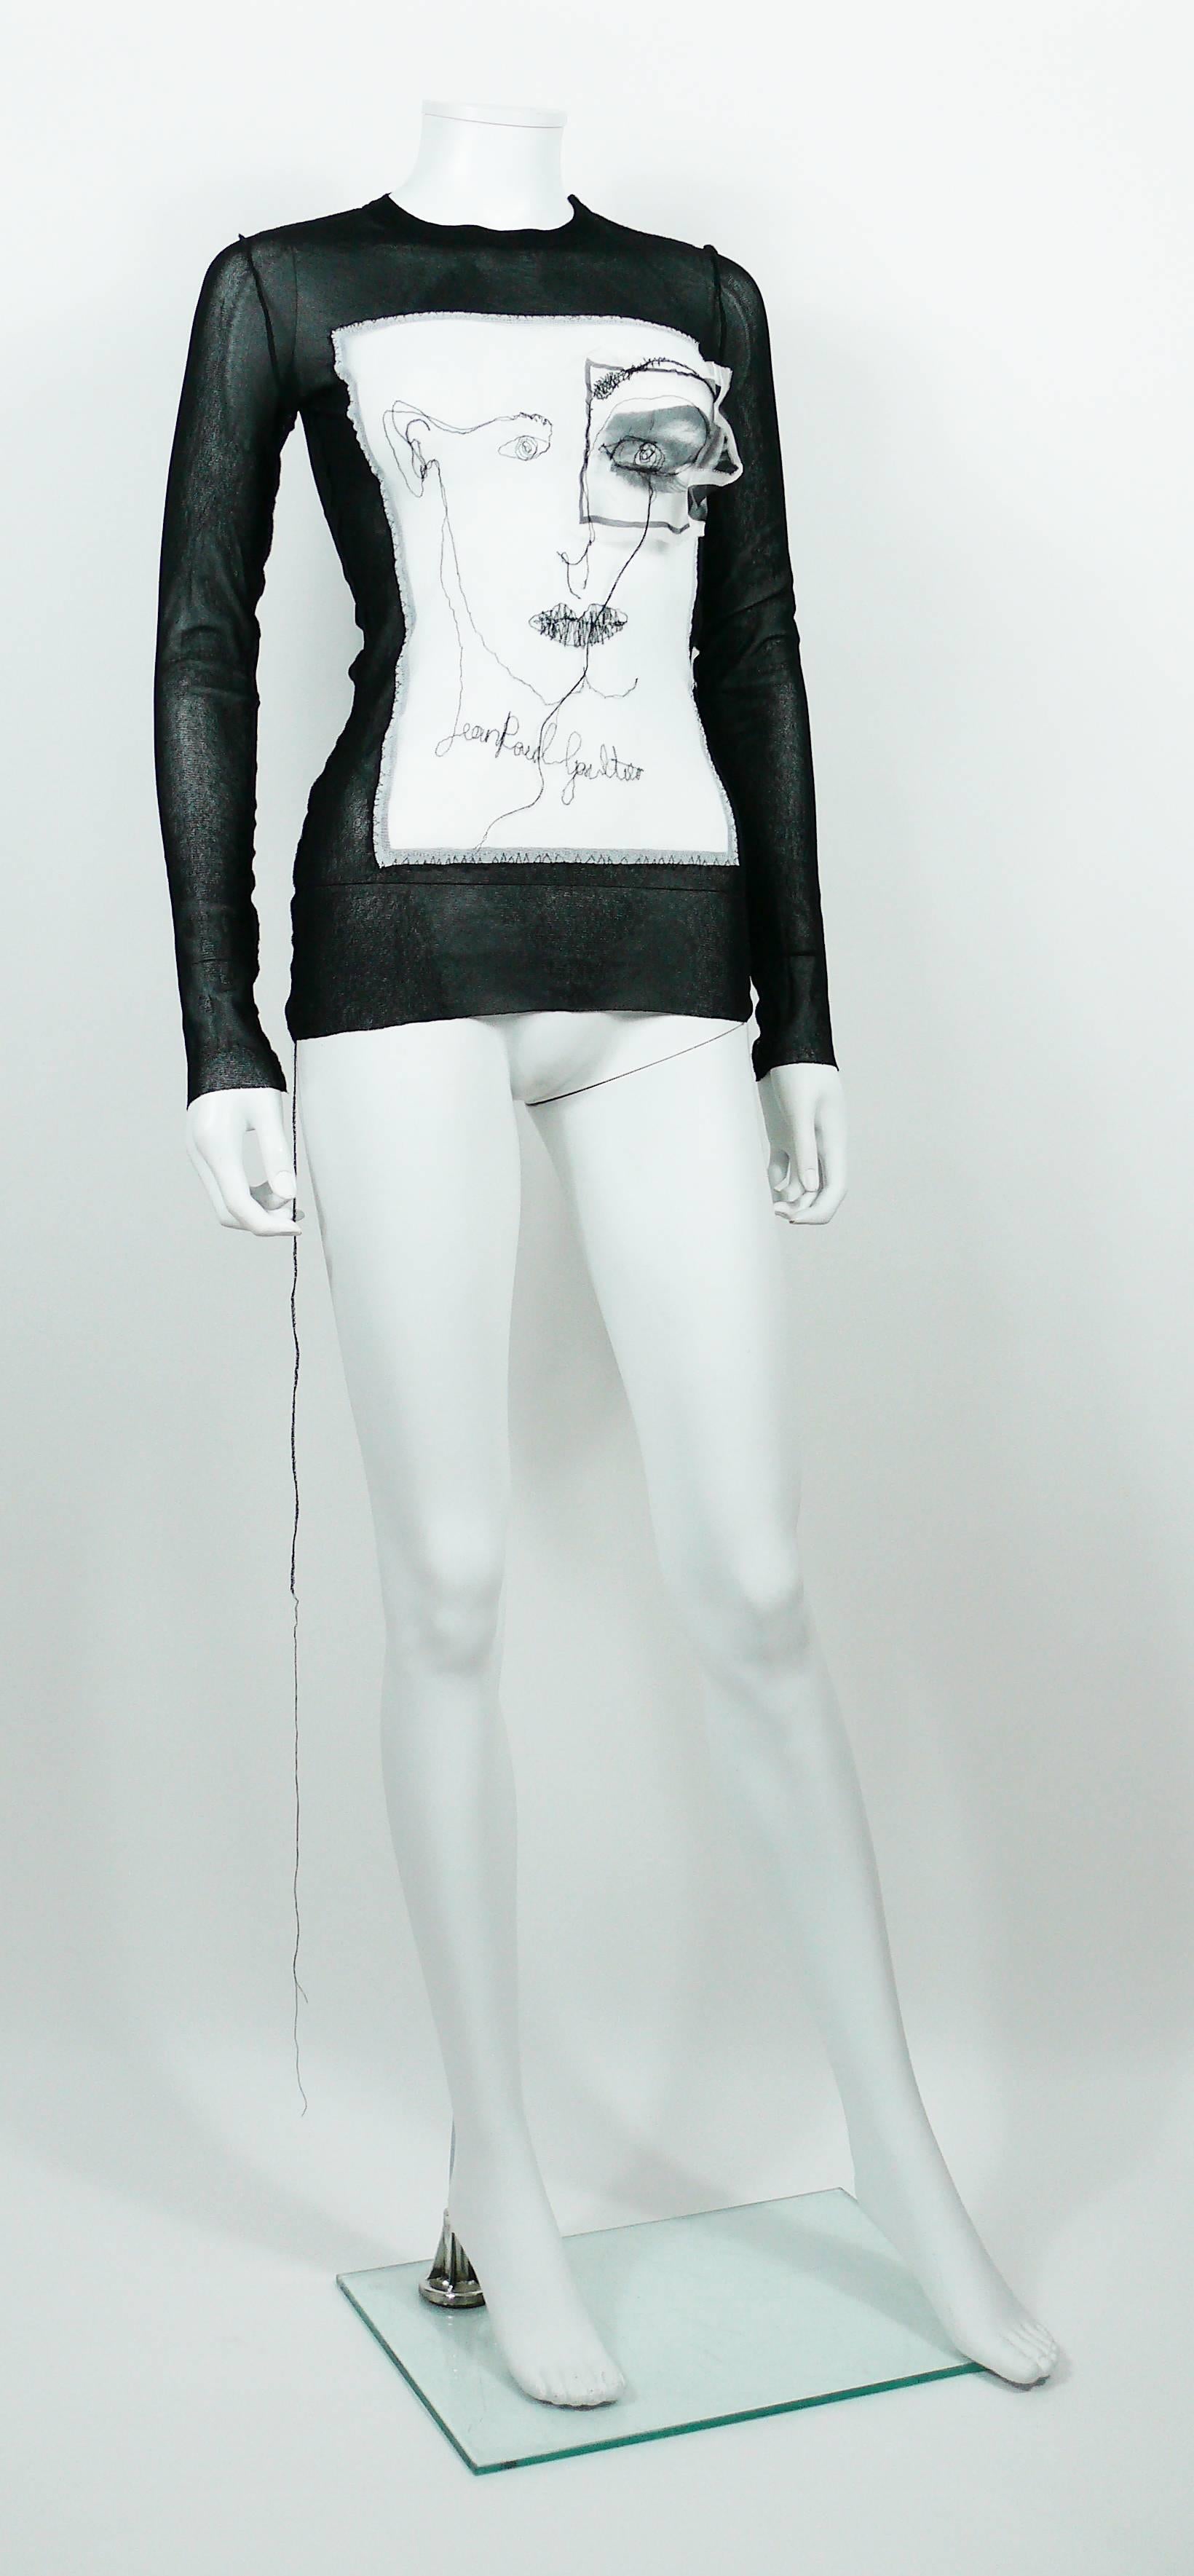 JEAN PAUL GAULTIER Maille Femme black sheer mesh top with embroidered portrait and eye applique.

This stretchy mesh nylon top is embroidered with black JEAN PAUL GAULTIER cursive signature.

Label reads JEAN PAUL GAULTIER Maille Femme Made in